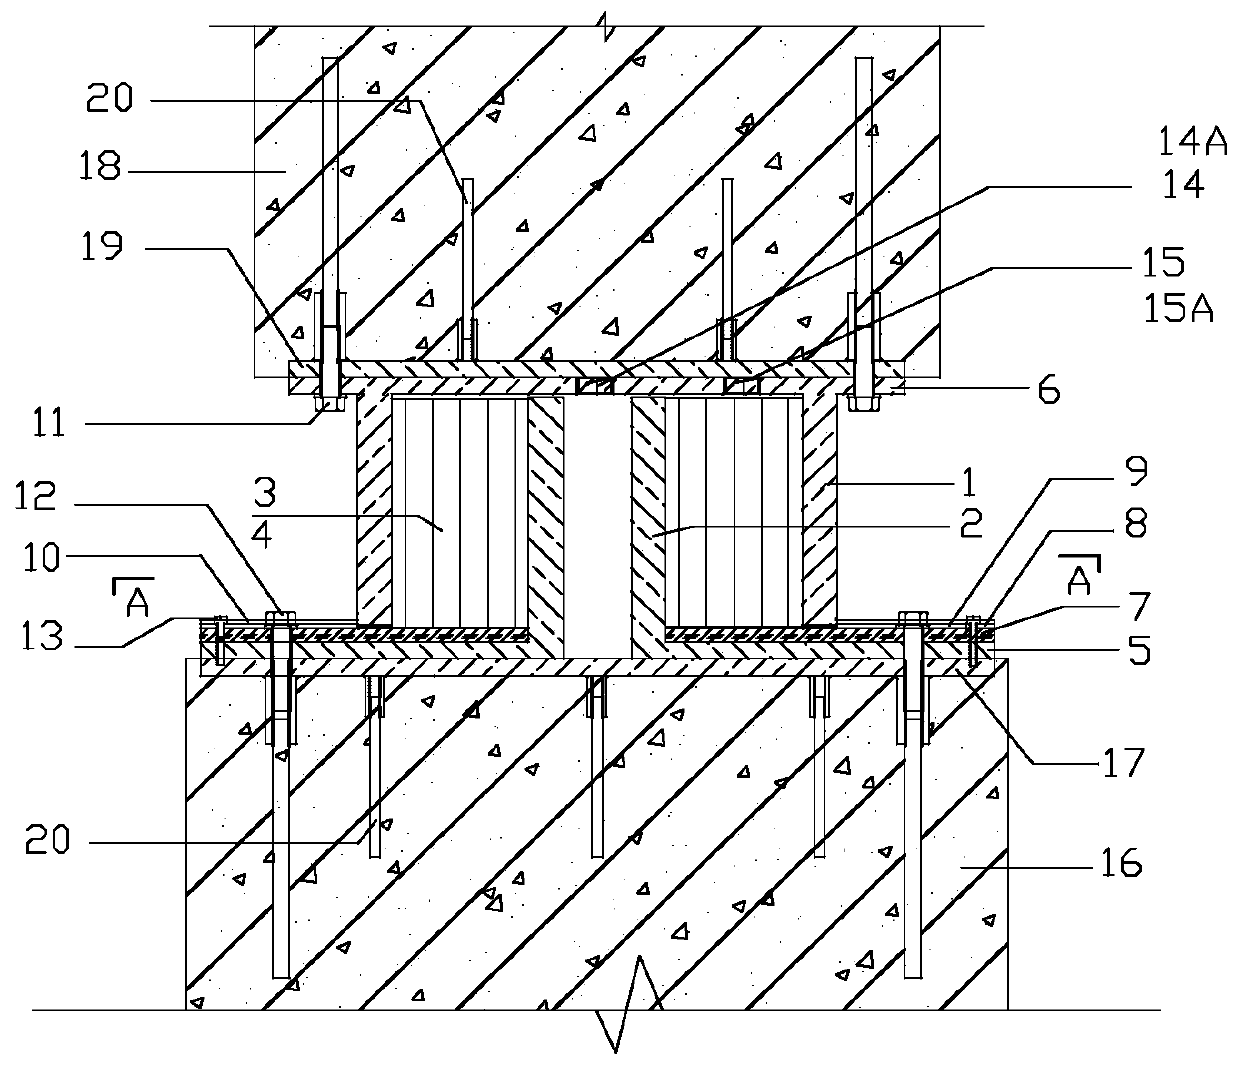 A support device for shock absorption and isolation of buildings, bridges and structures